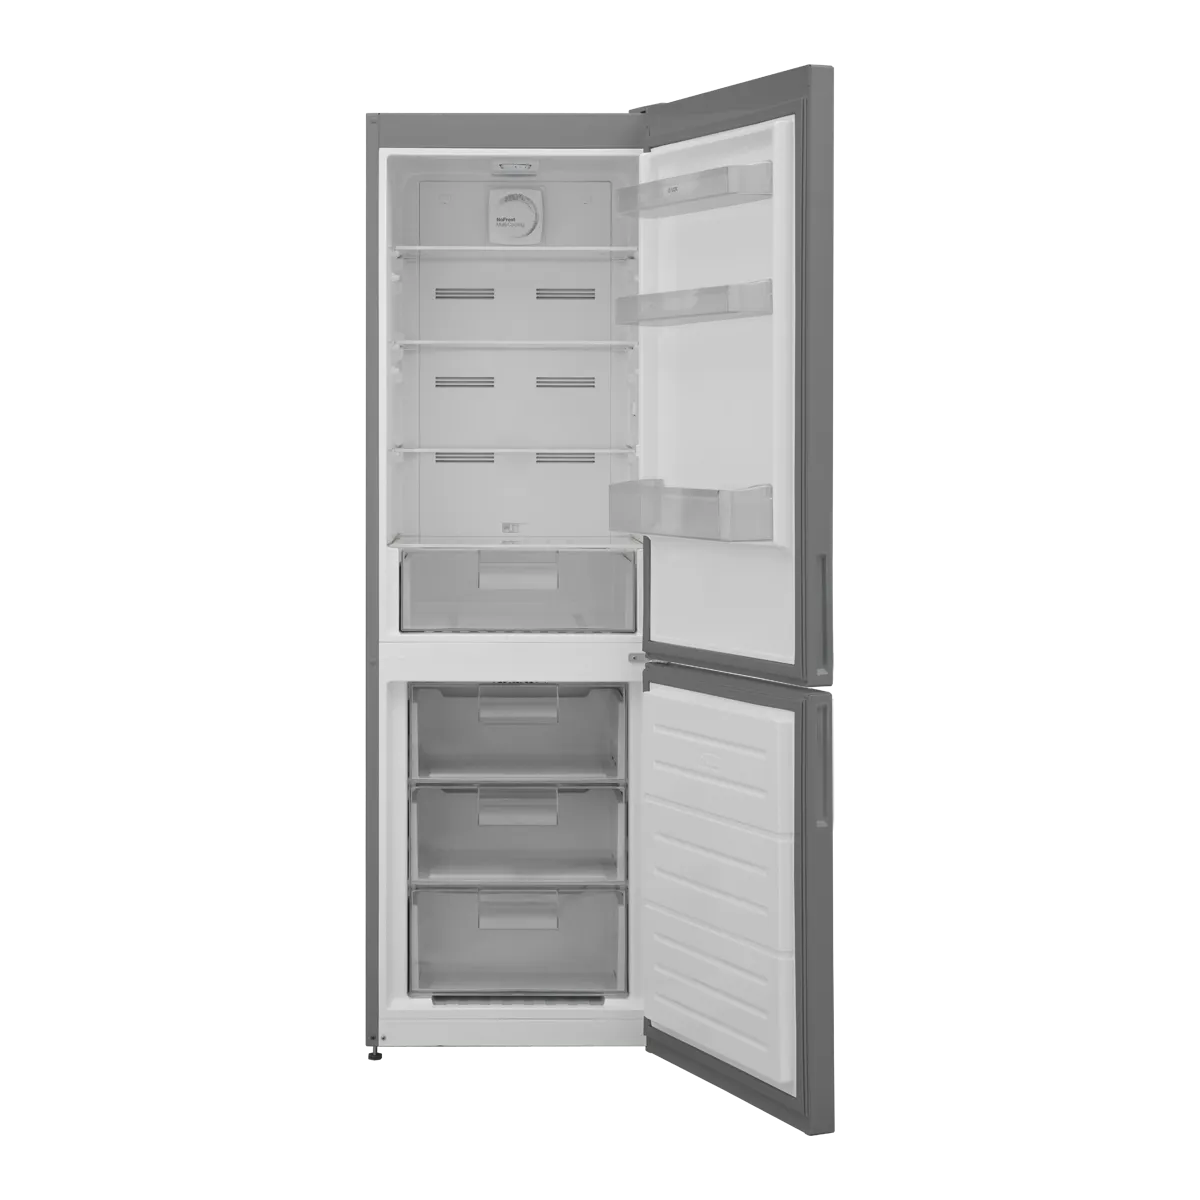 Combined refrigerator NF 3790 SF 